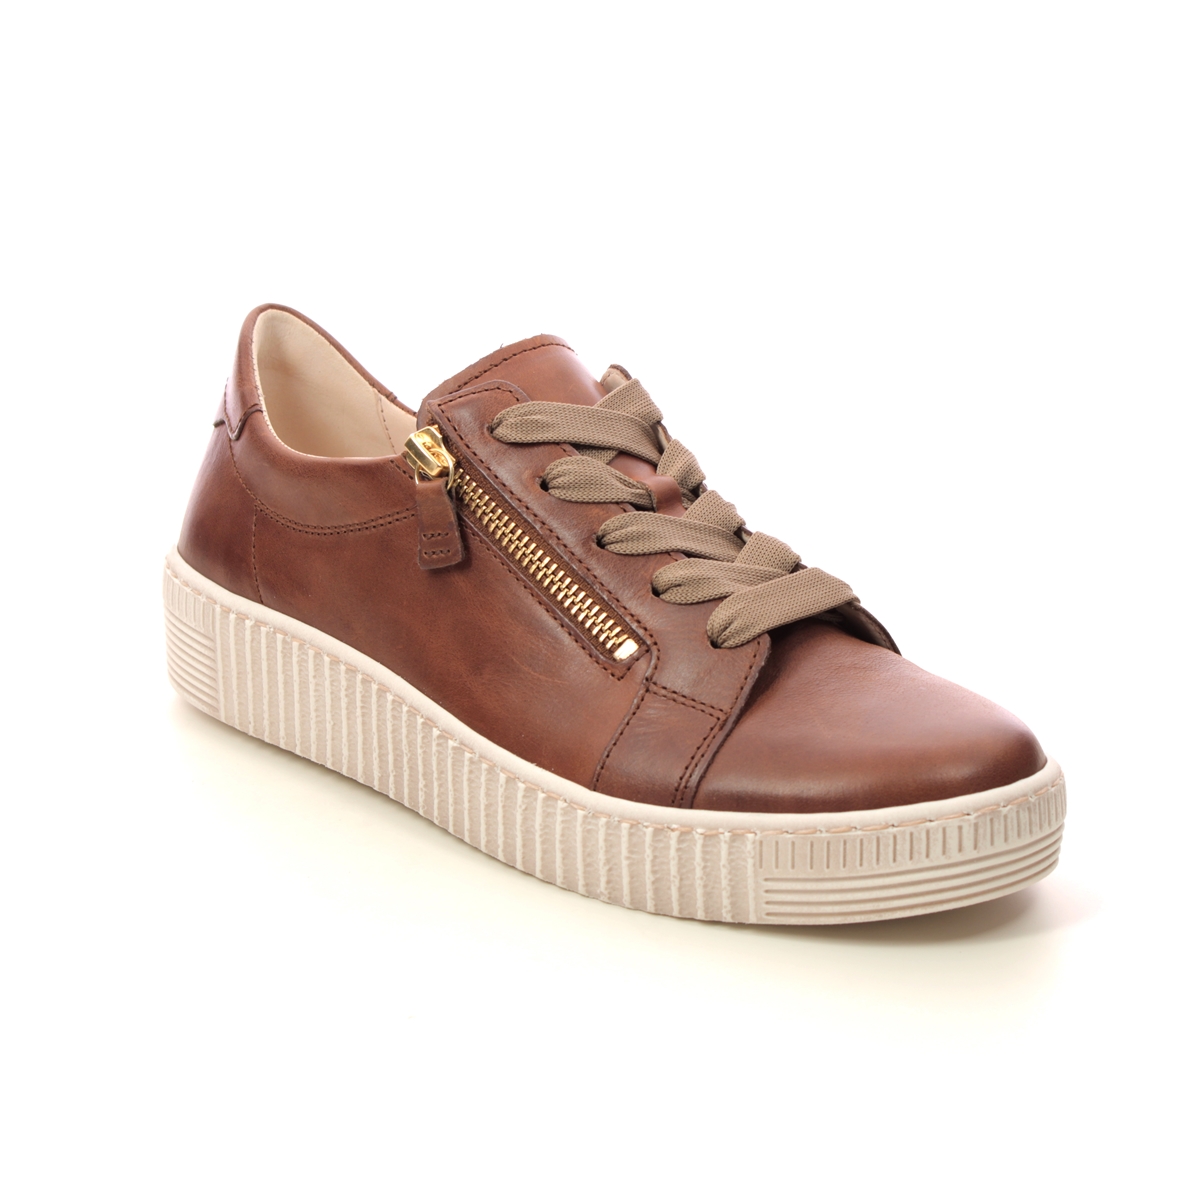 Gabor Wisdom Tan Leather Womens Trainers 93.334.24 In Size 4 In Plain Tan Leather  Womens Trainers In Soft Tan Leather Leather